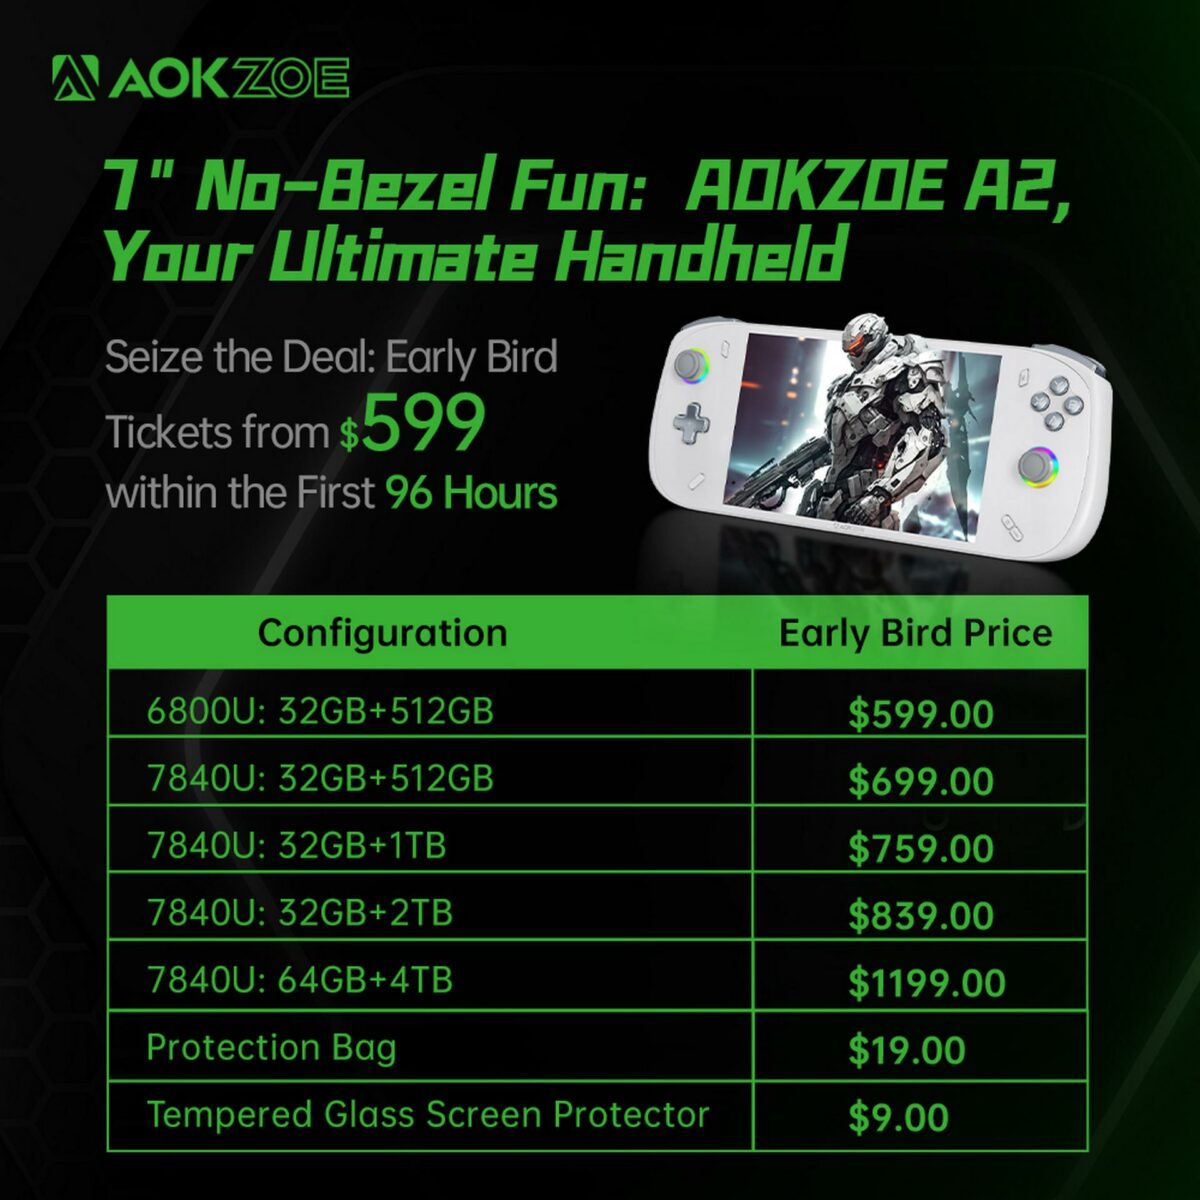 Aokzoe A2 pricing table.